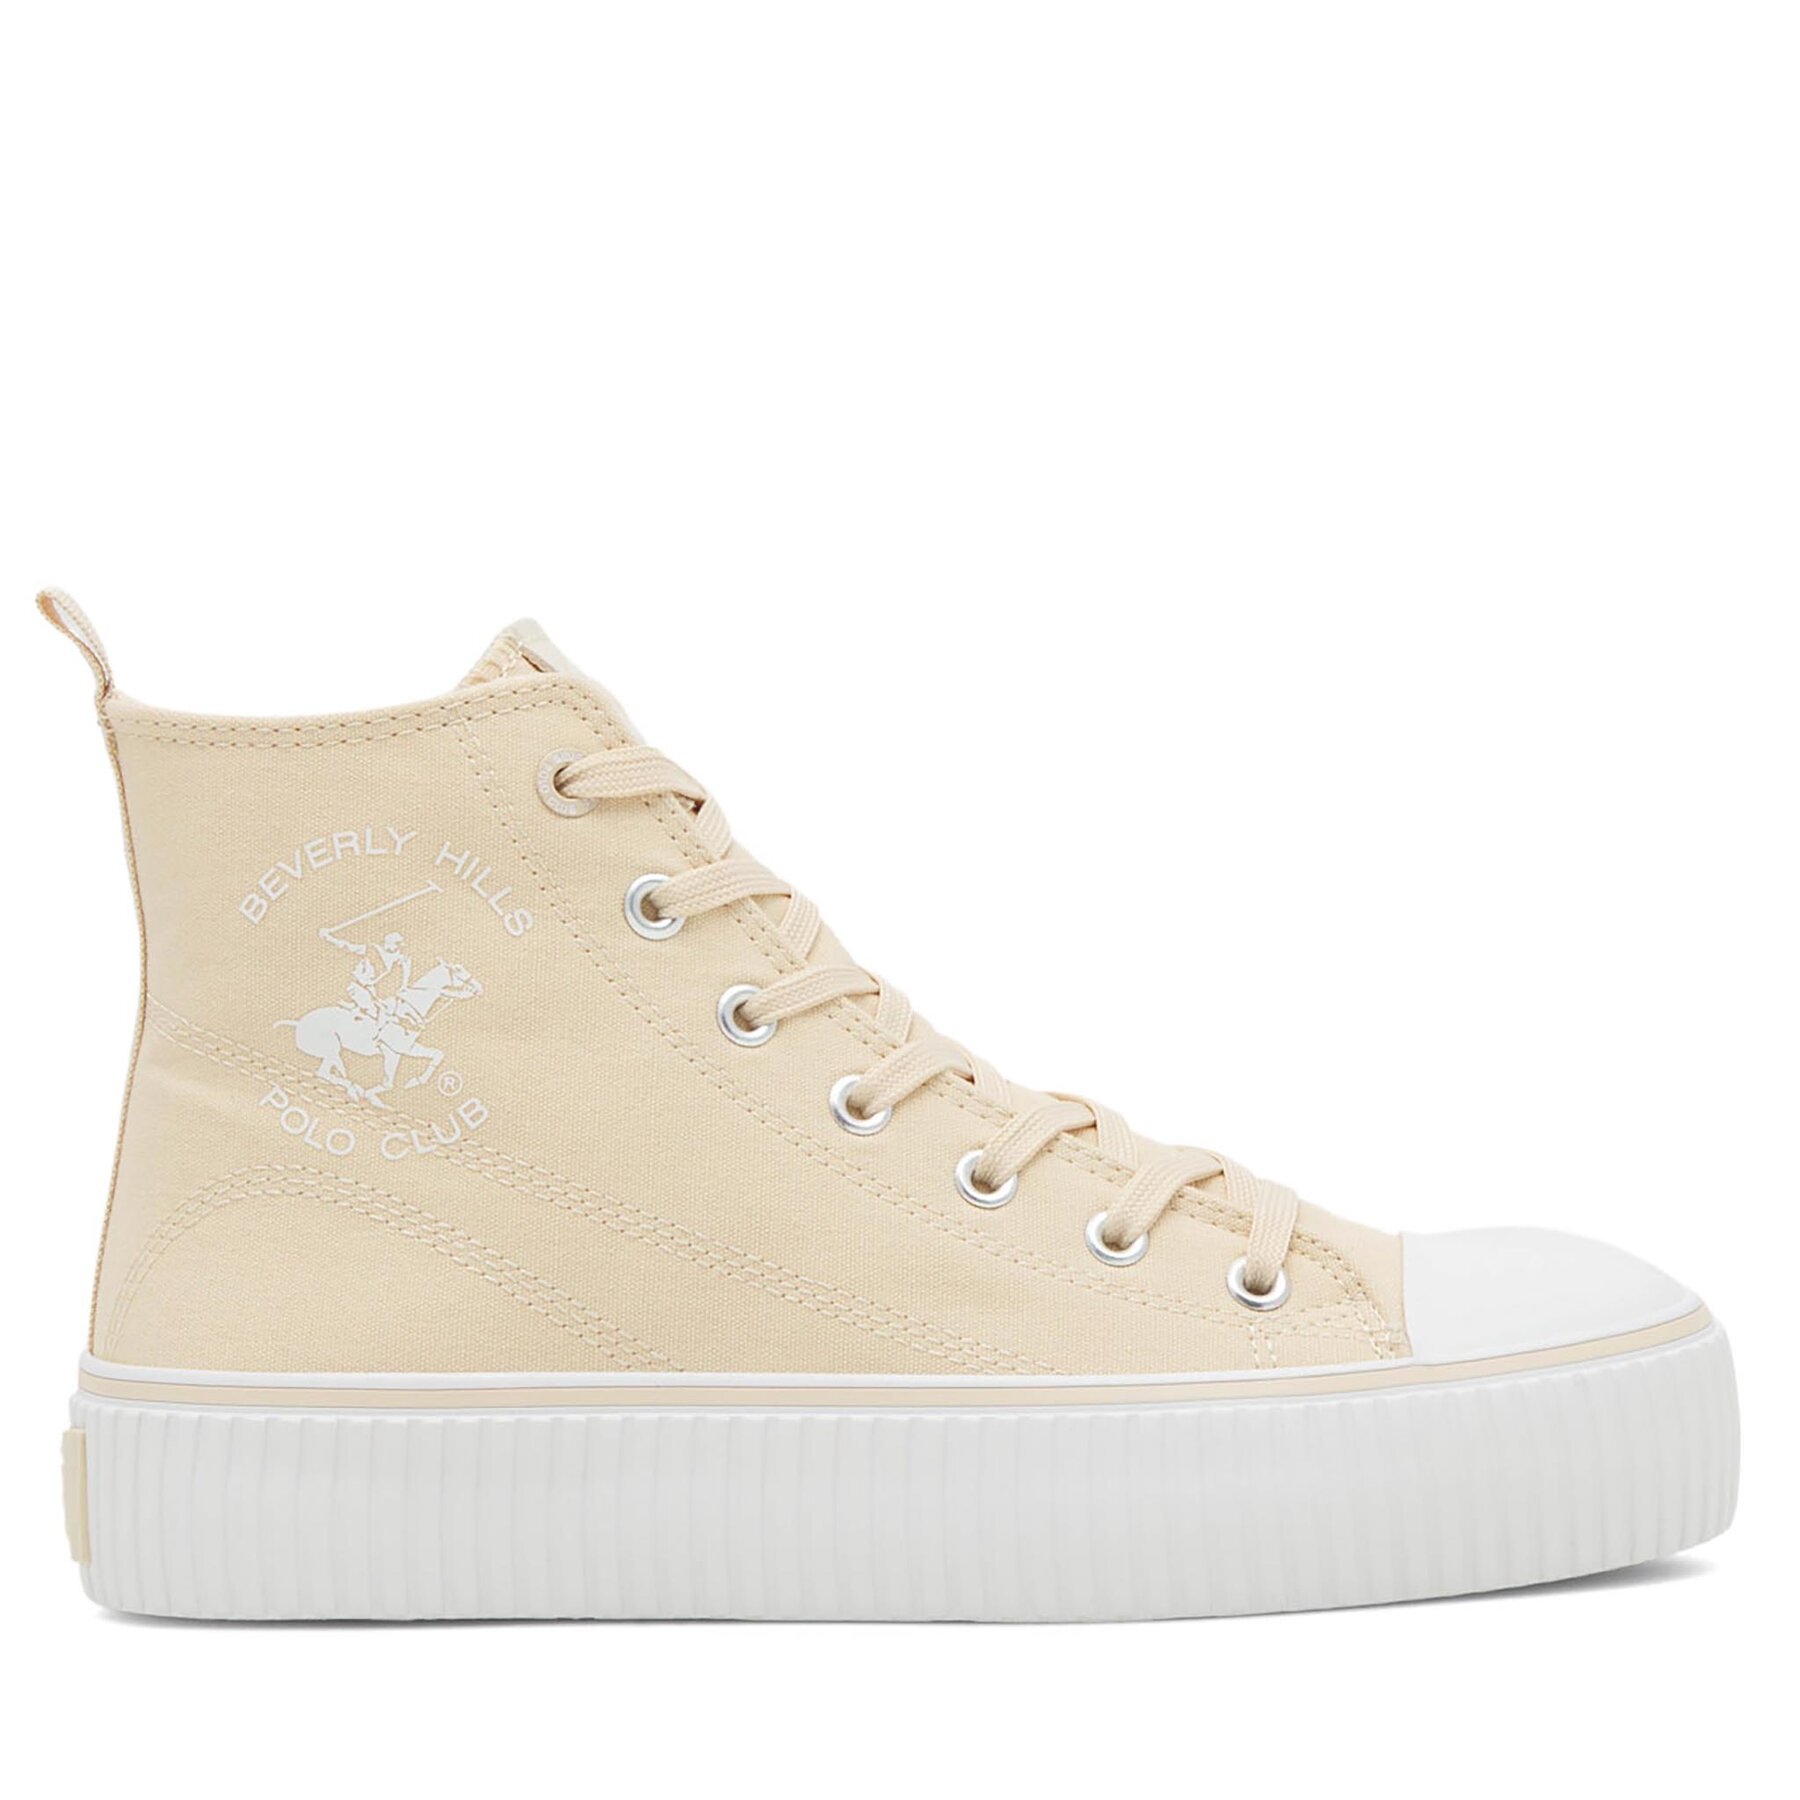 Sneakers aus Stoff Beverly Hills Polo Club BHPC026M Beige von Beverly Hills Polo Club